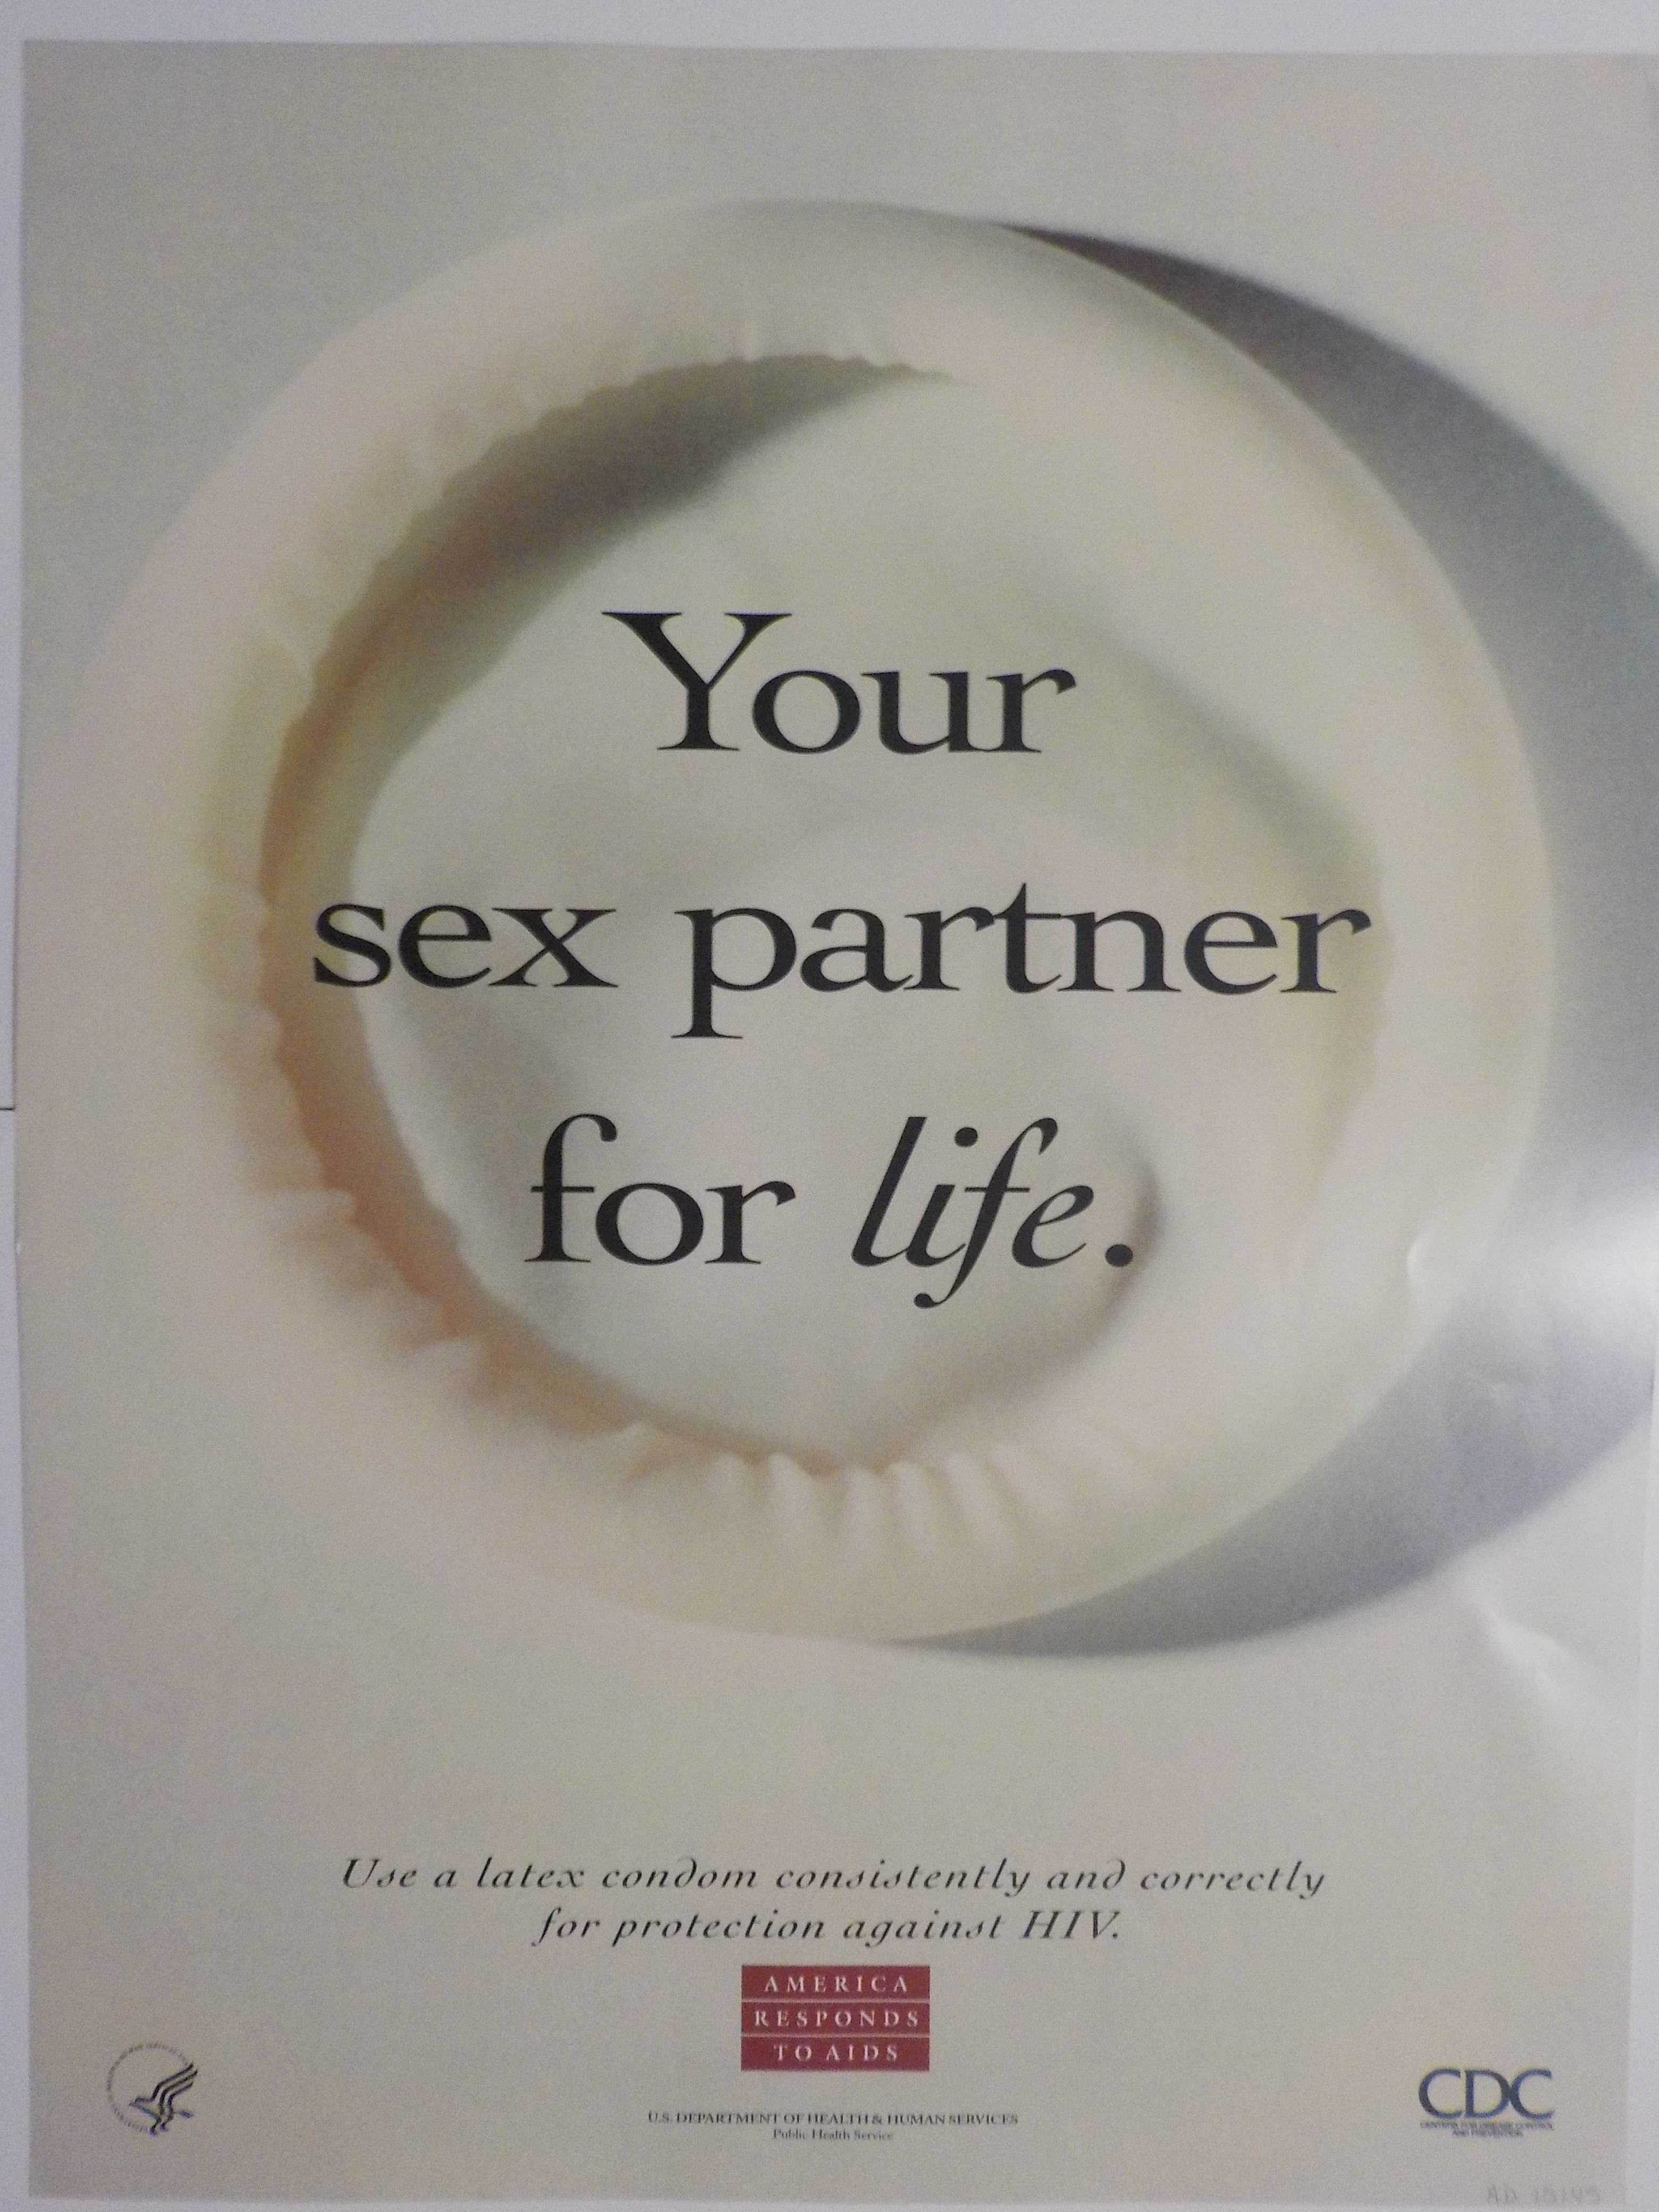 Your sex partner for life.